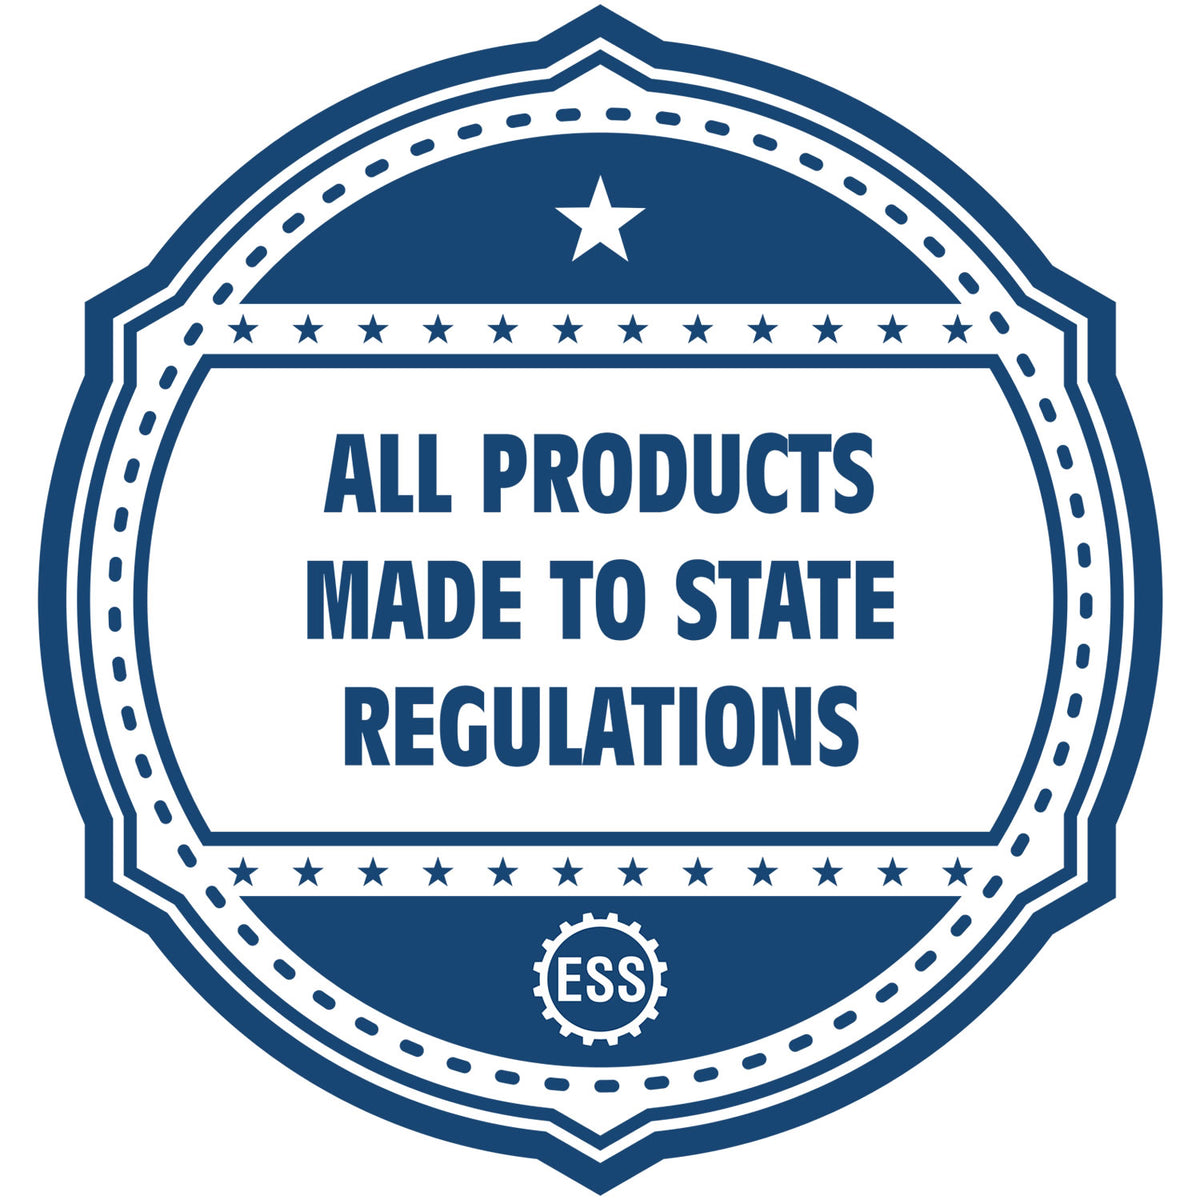 An icon or badge element for the State of Mississippi Architectural Seal Embosser showing that this product is made in compliance with state regulations.